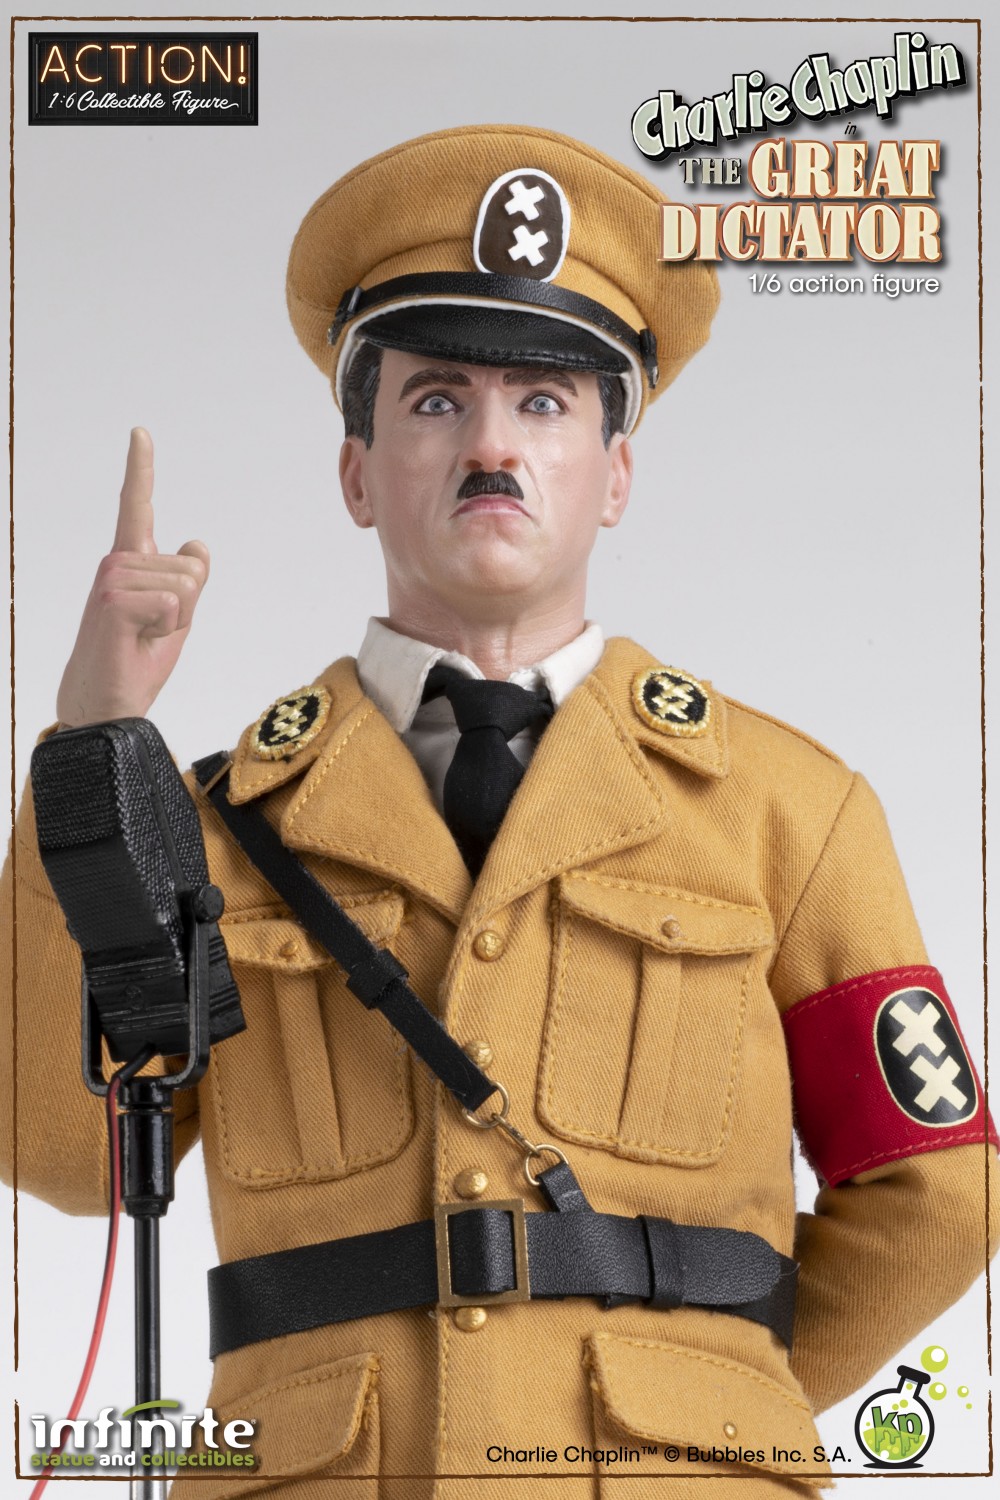 NEW PRODUCT: Infinite Statue & Kaustic Plastik: CHARLIE CHAPLIN “THE GREAT DICTATOR”  1/6 ACTION FIGURE 5582